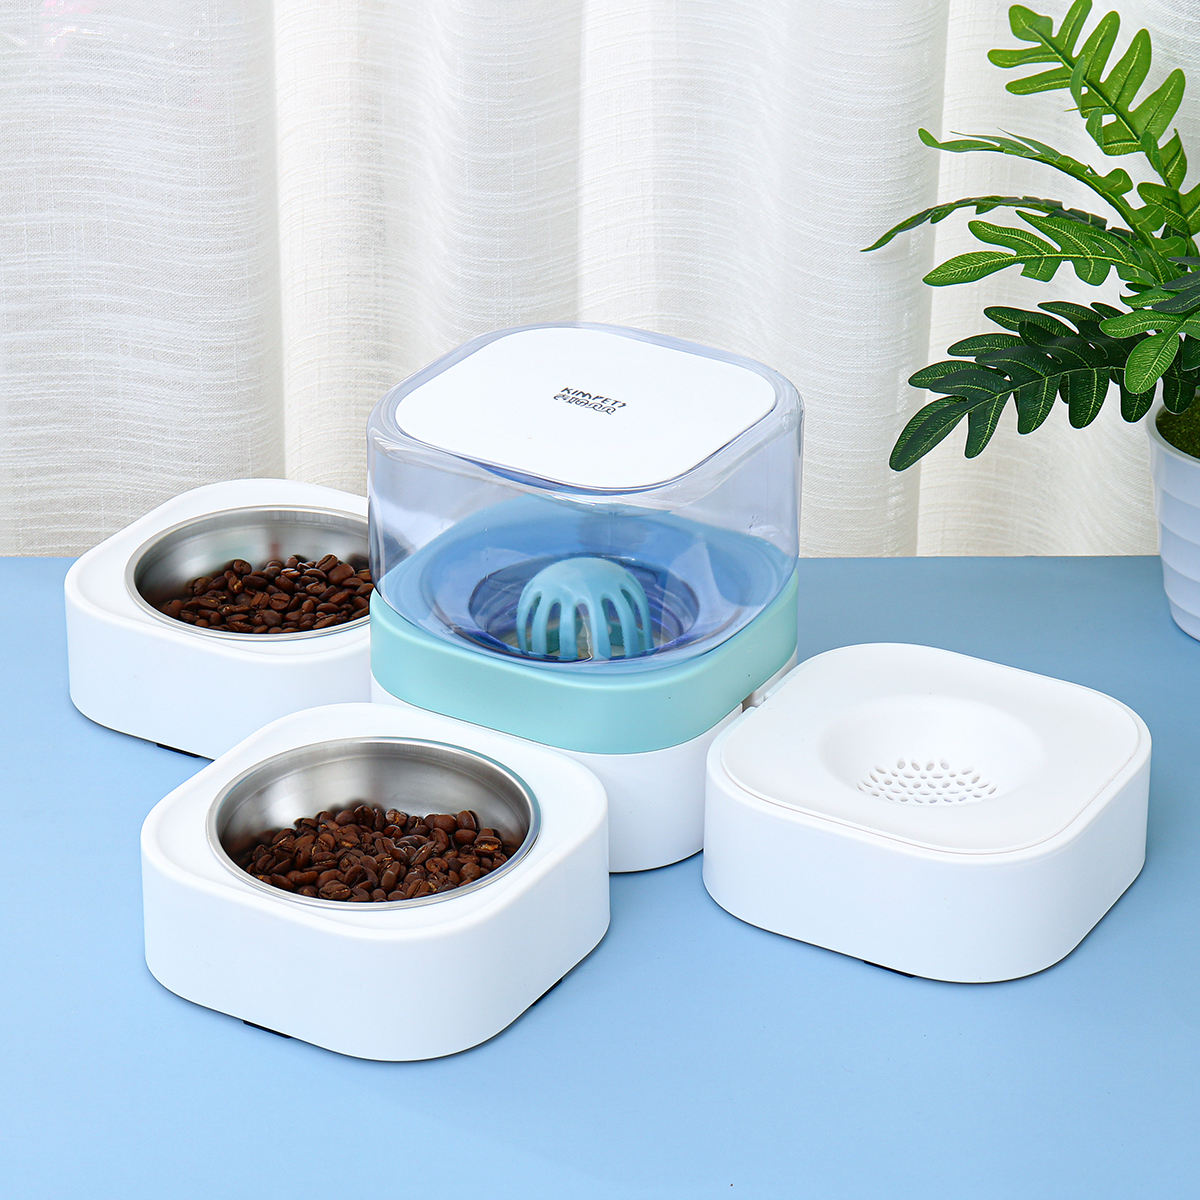 18L-Pet-Bowls-Food-Automatic-Feeder-Fountain-Water-Drinking-for-Cat-Dog-Pet-Feeding-Container-Pet-Su-1775165-6